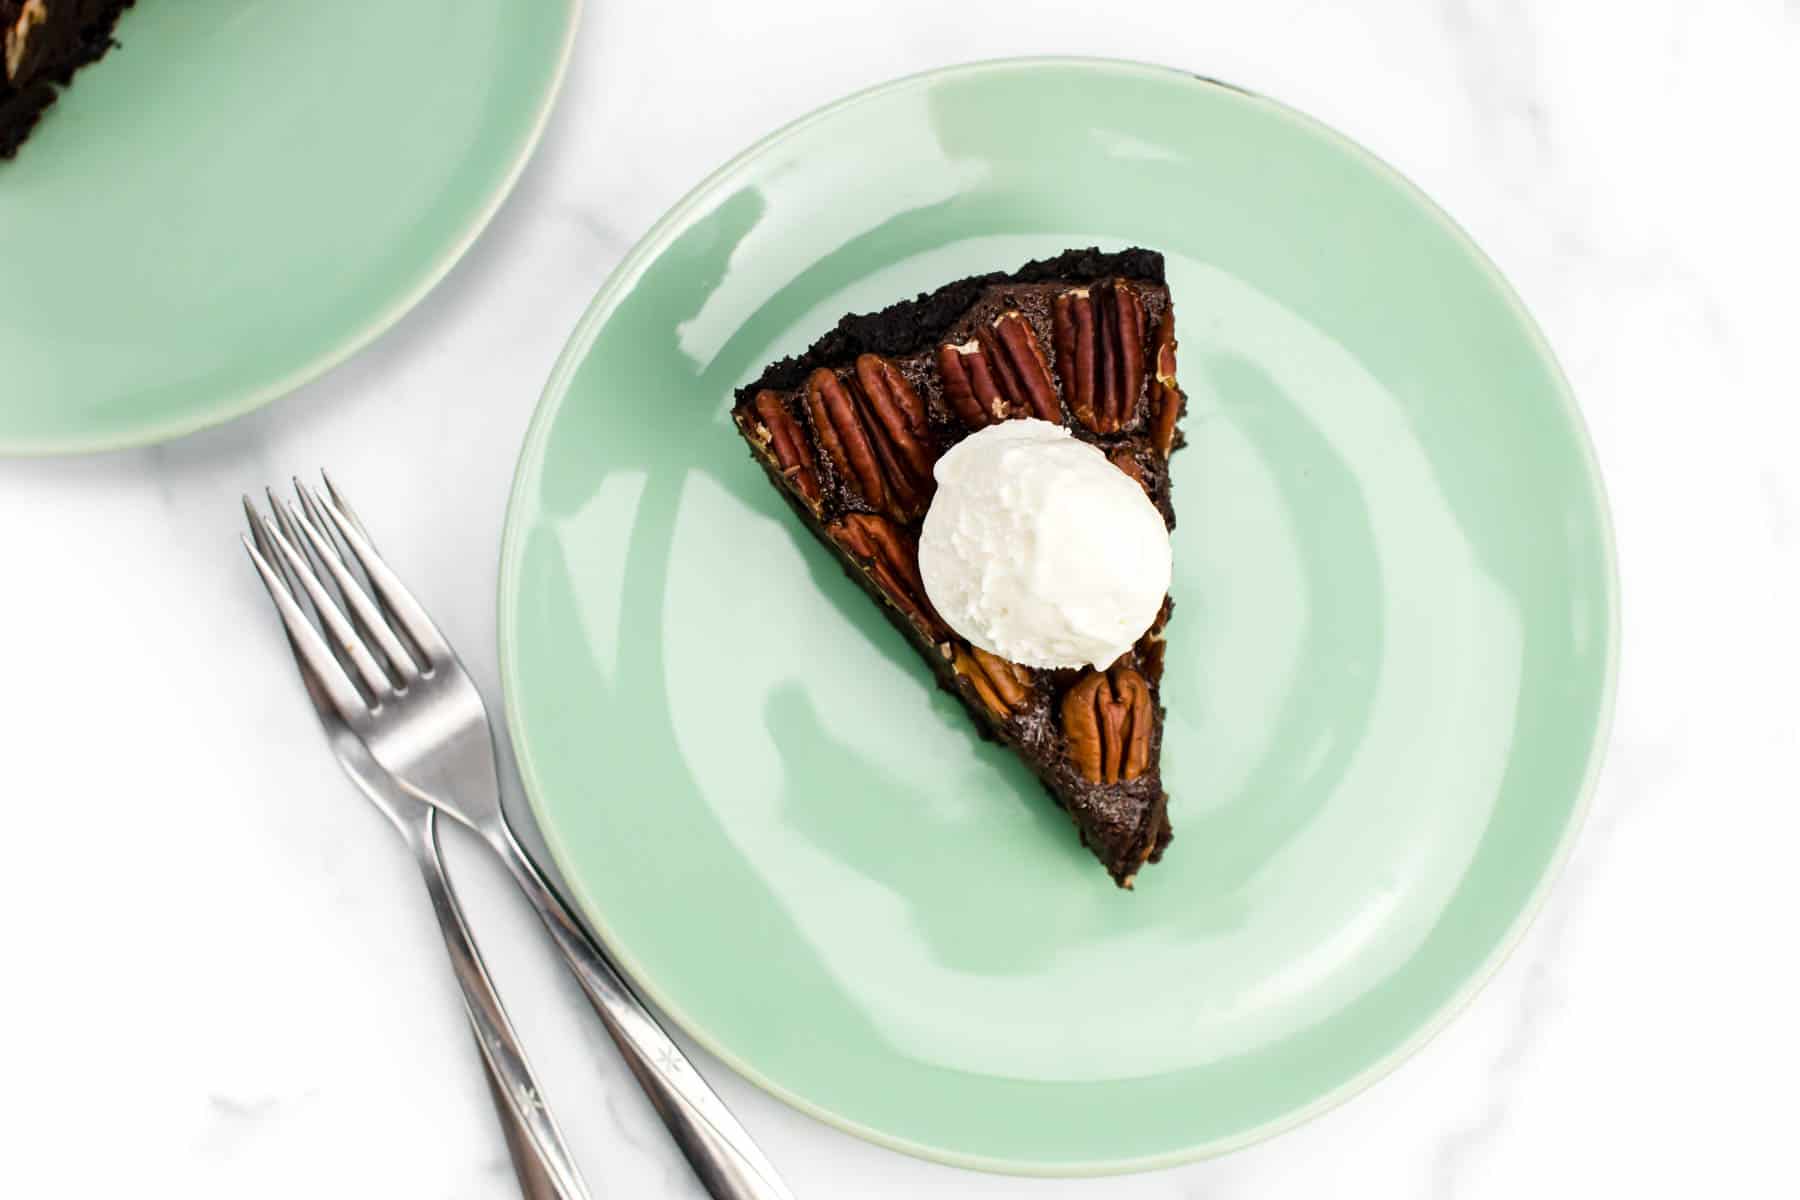 A chocolate pie with nuts on top and a scoop of ice cream on a light green plate with two forks